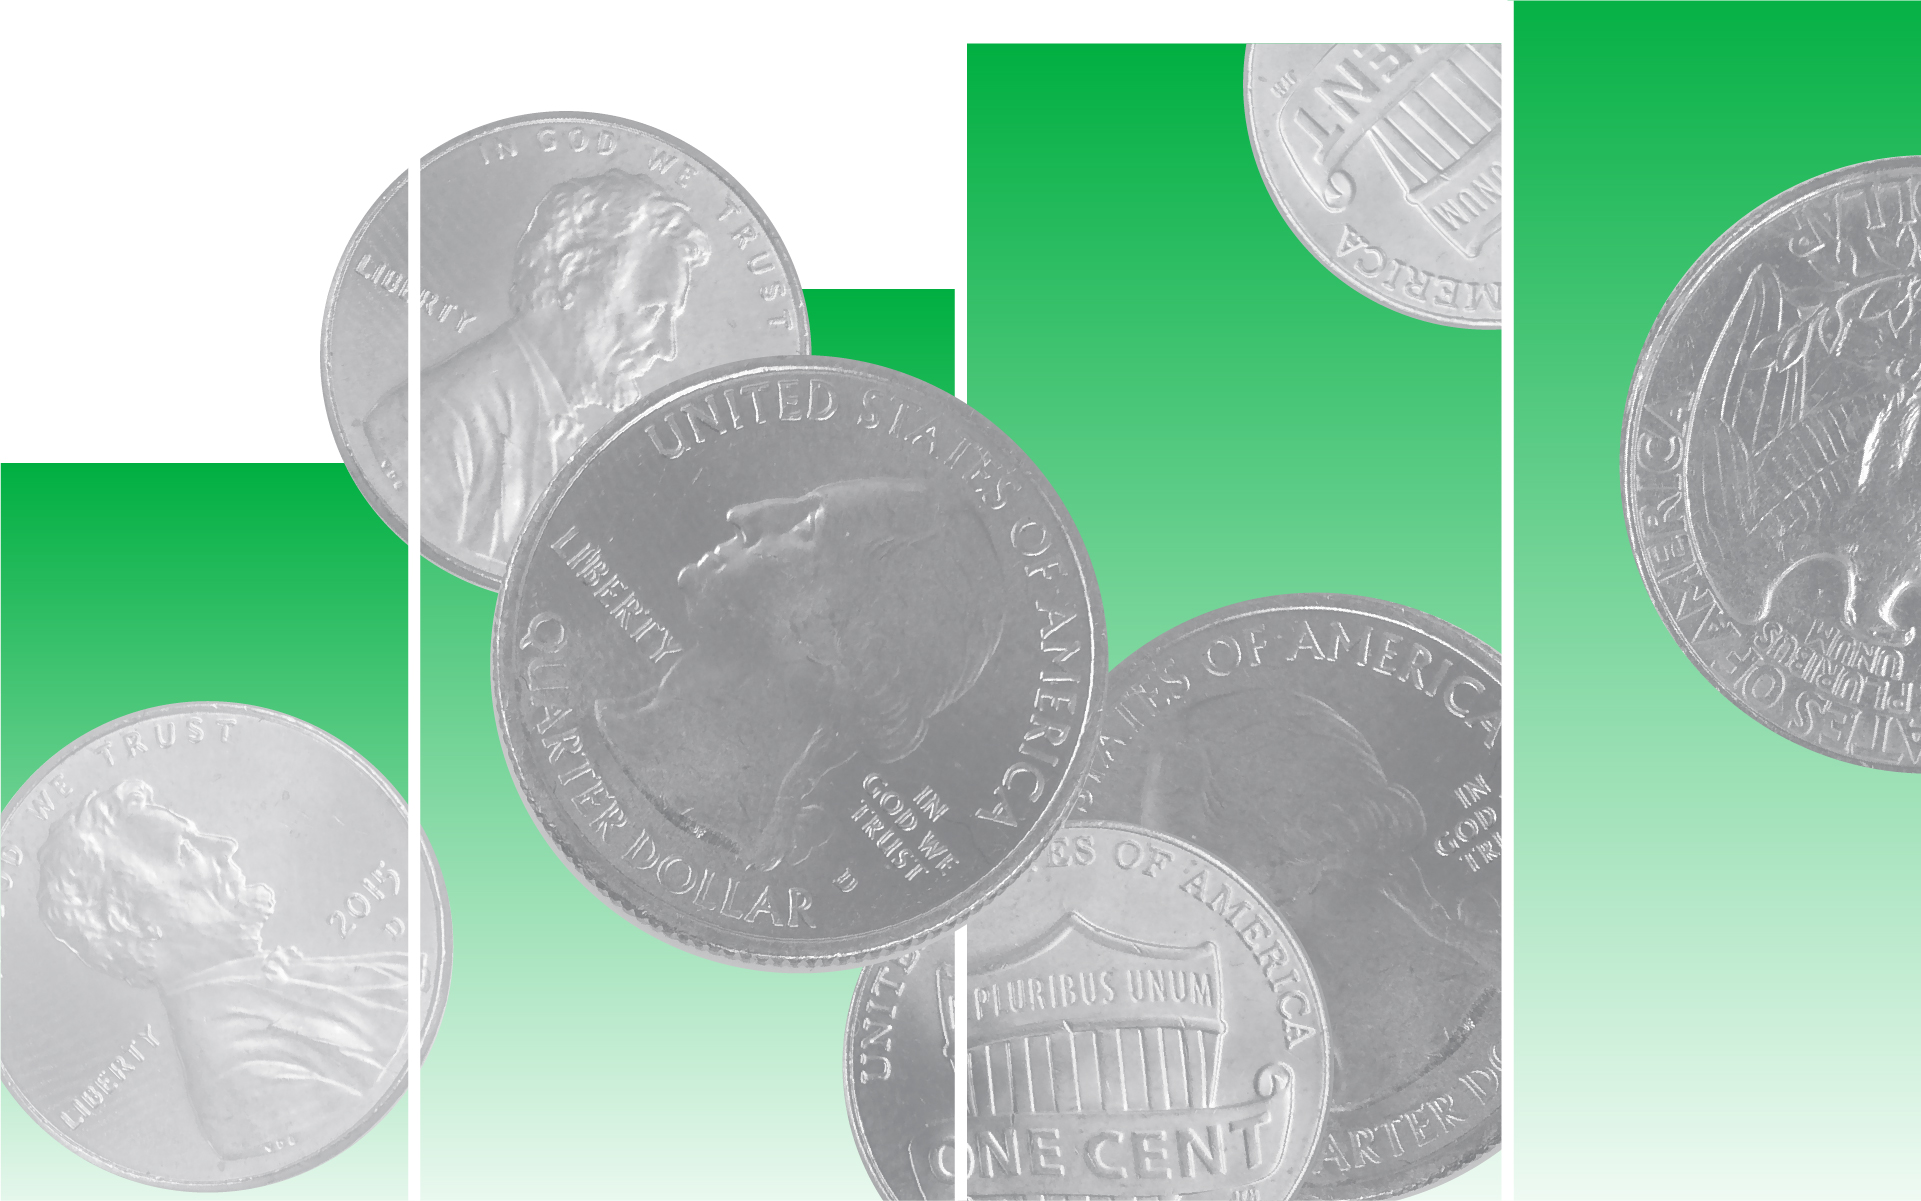 An illustrative representation of stock dividends, featuring images of coins.